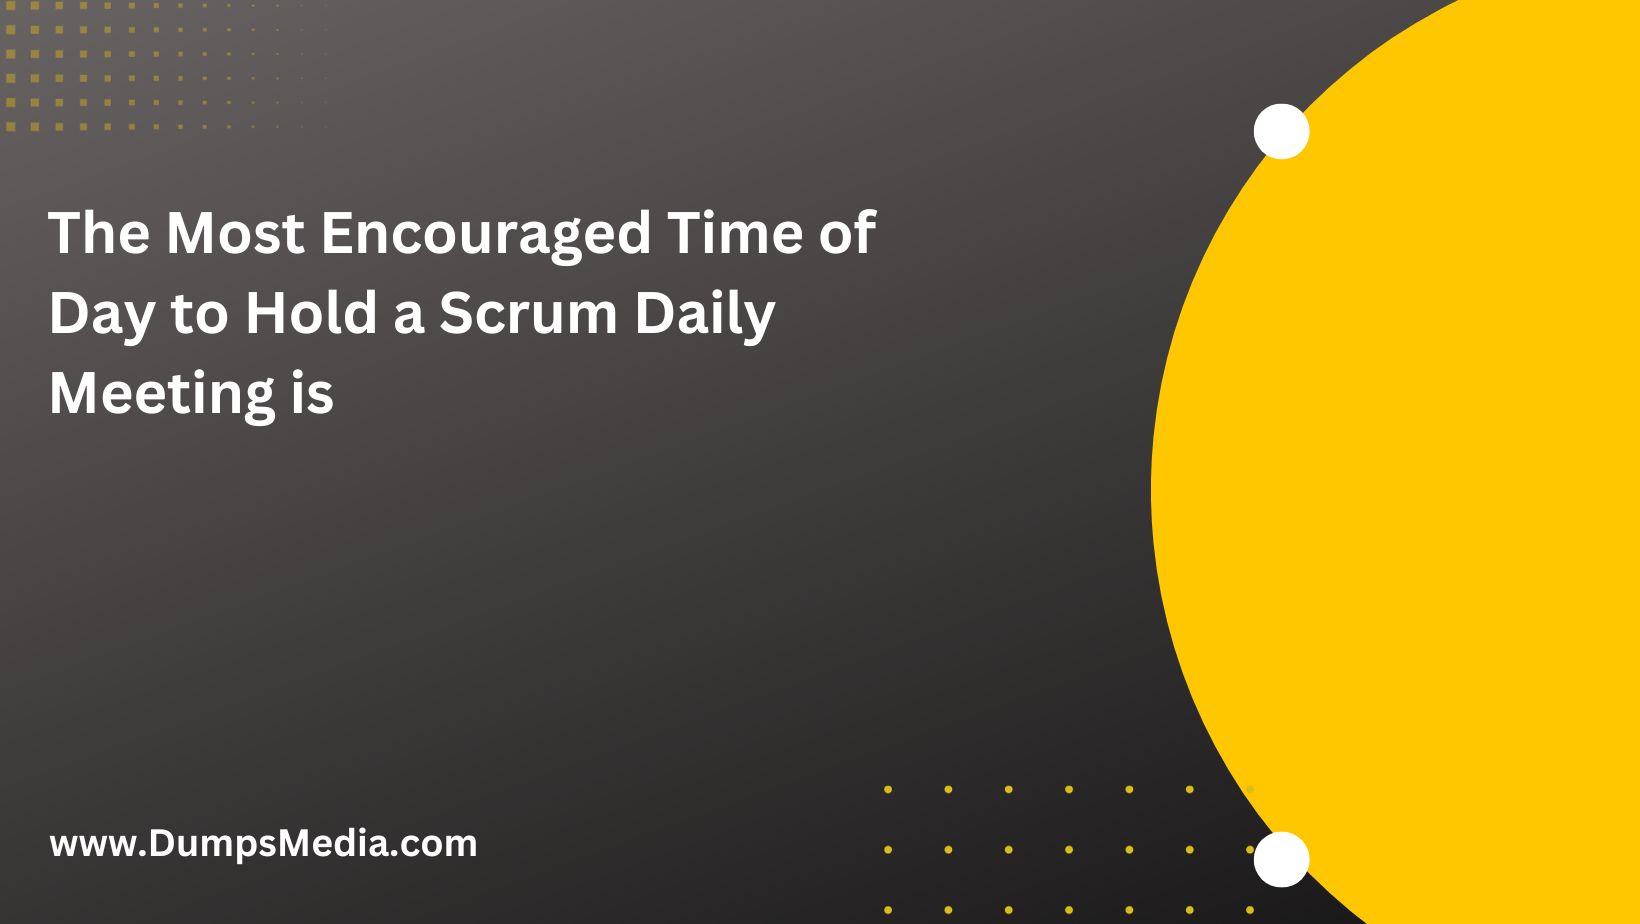 The Most Encouraged Time of Day to Hold a Scrum Daily Meeting is